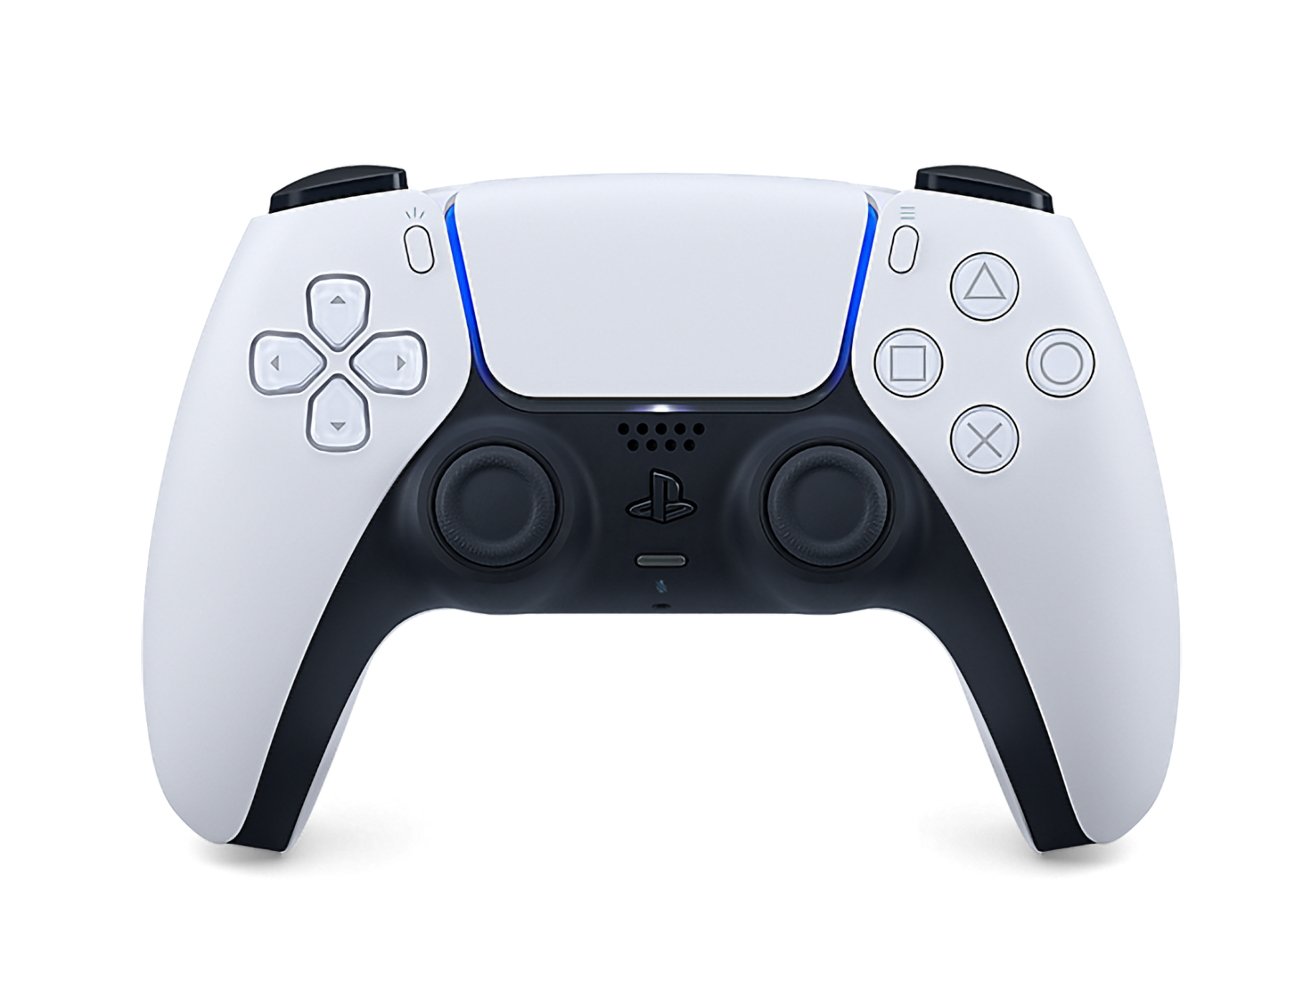 A PlayStation 5 controller with white and black design, dual thumbsticks, and classic button layout.